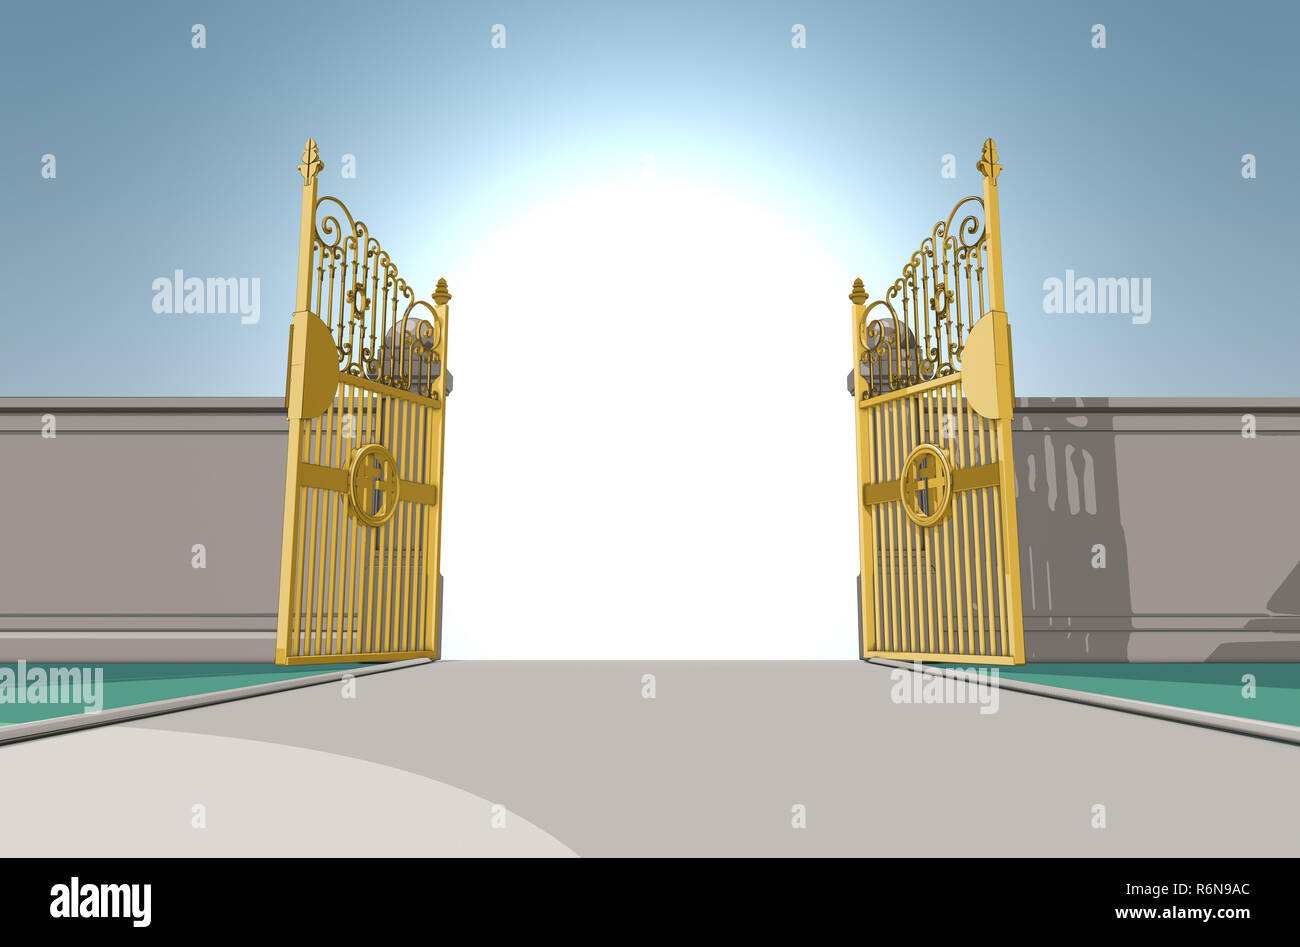 An illustrated depiction of the golden pearly gates of heaven fully opened on a blue sky background - 3D render Stock Photo